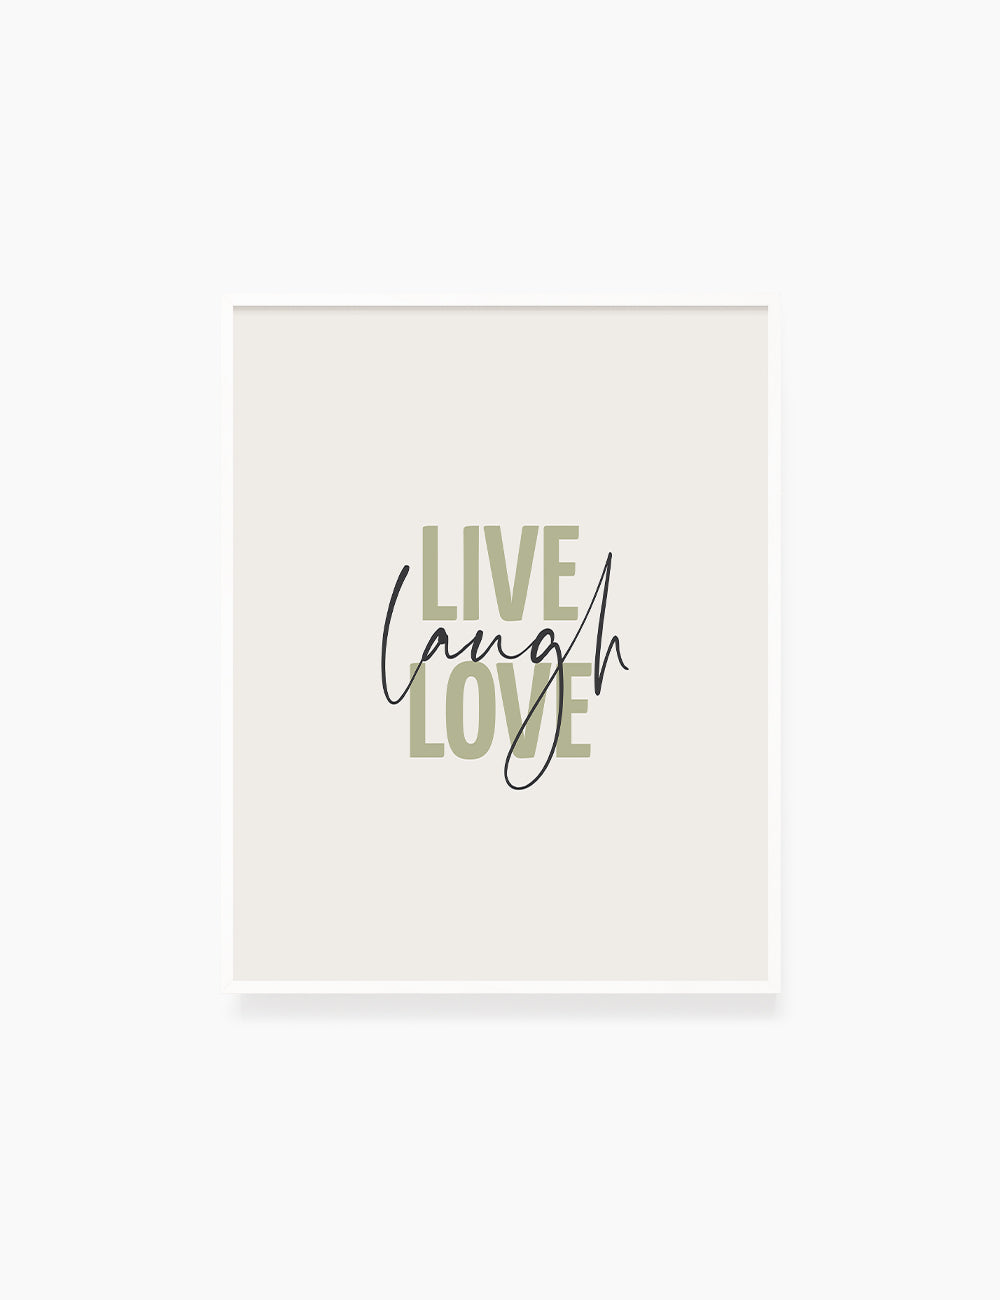 LIVE. LAUGH. LOVE. Green. Beige. Inspirational quote. Printable Wall Art Quote. - PAPER MOON Art & Design